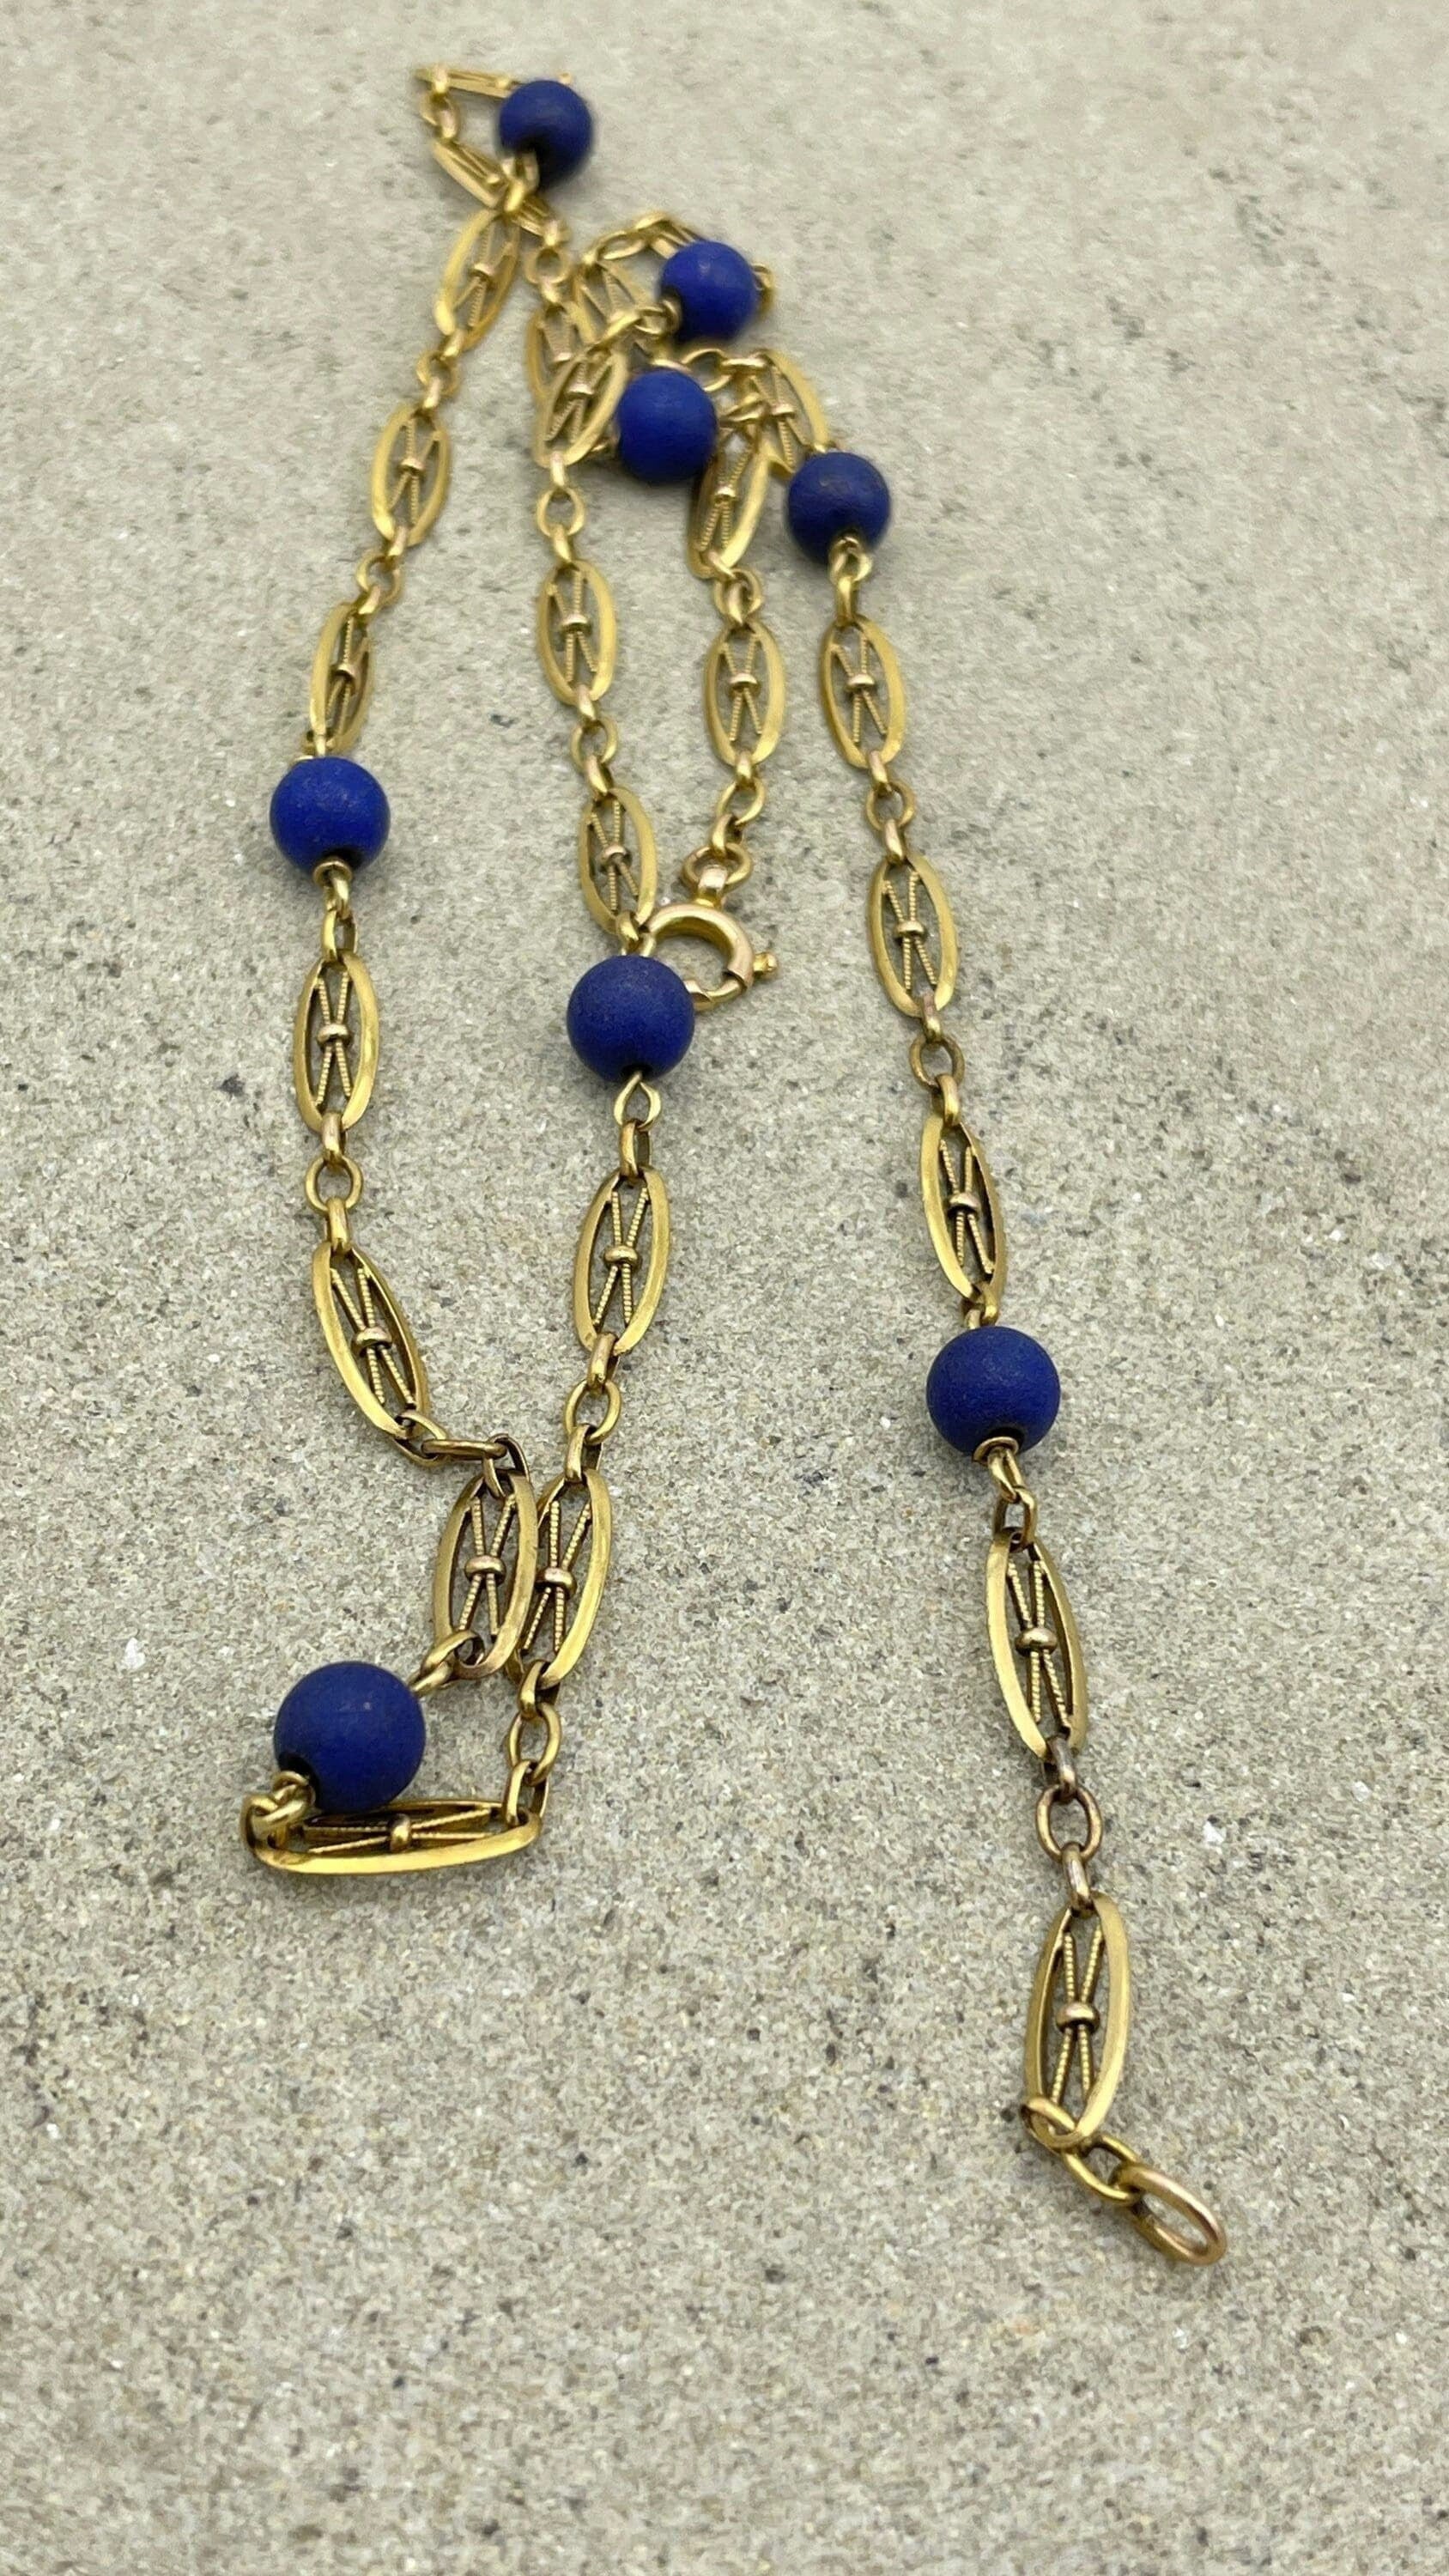 Antique 14ct gold fancy link chain necklace with lapis lazuli bead spacers c1910